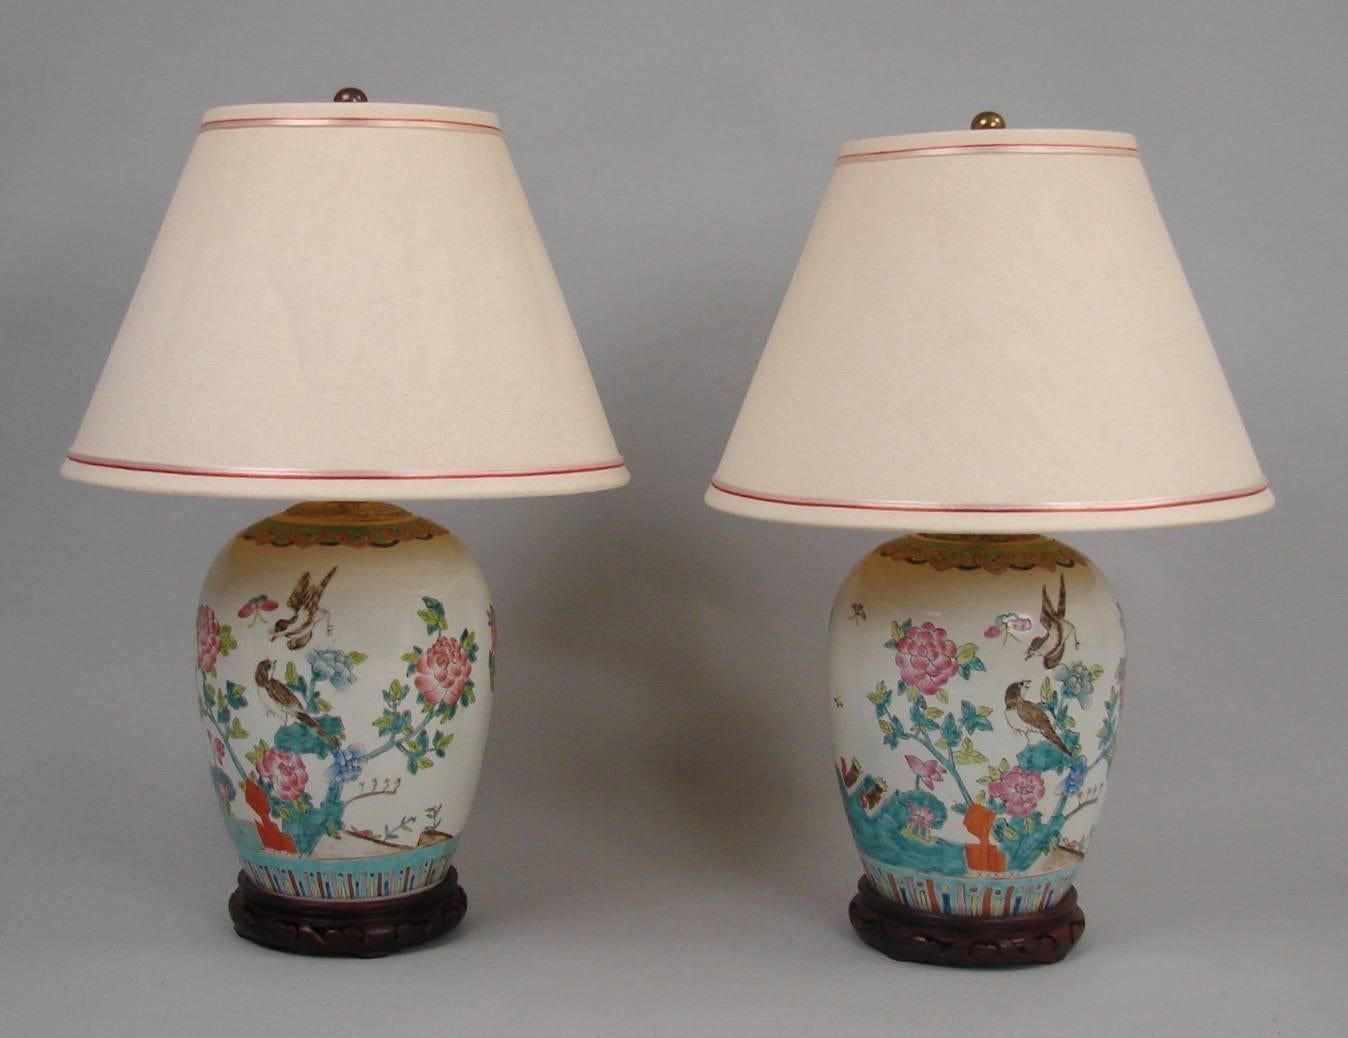 Chinoiserie Pretty Pair of Chinese Porcelain Vases Now as Lamps